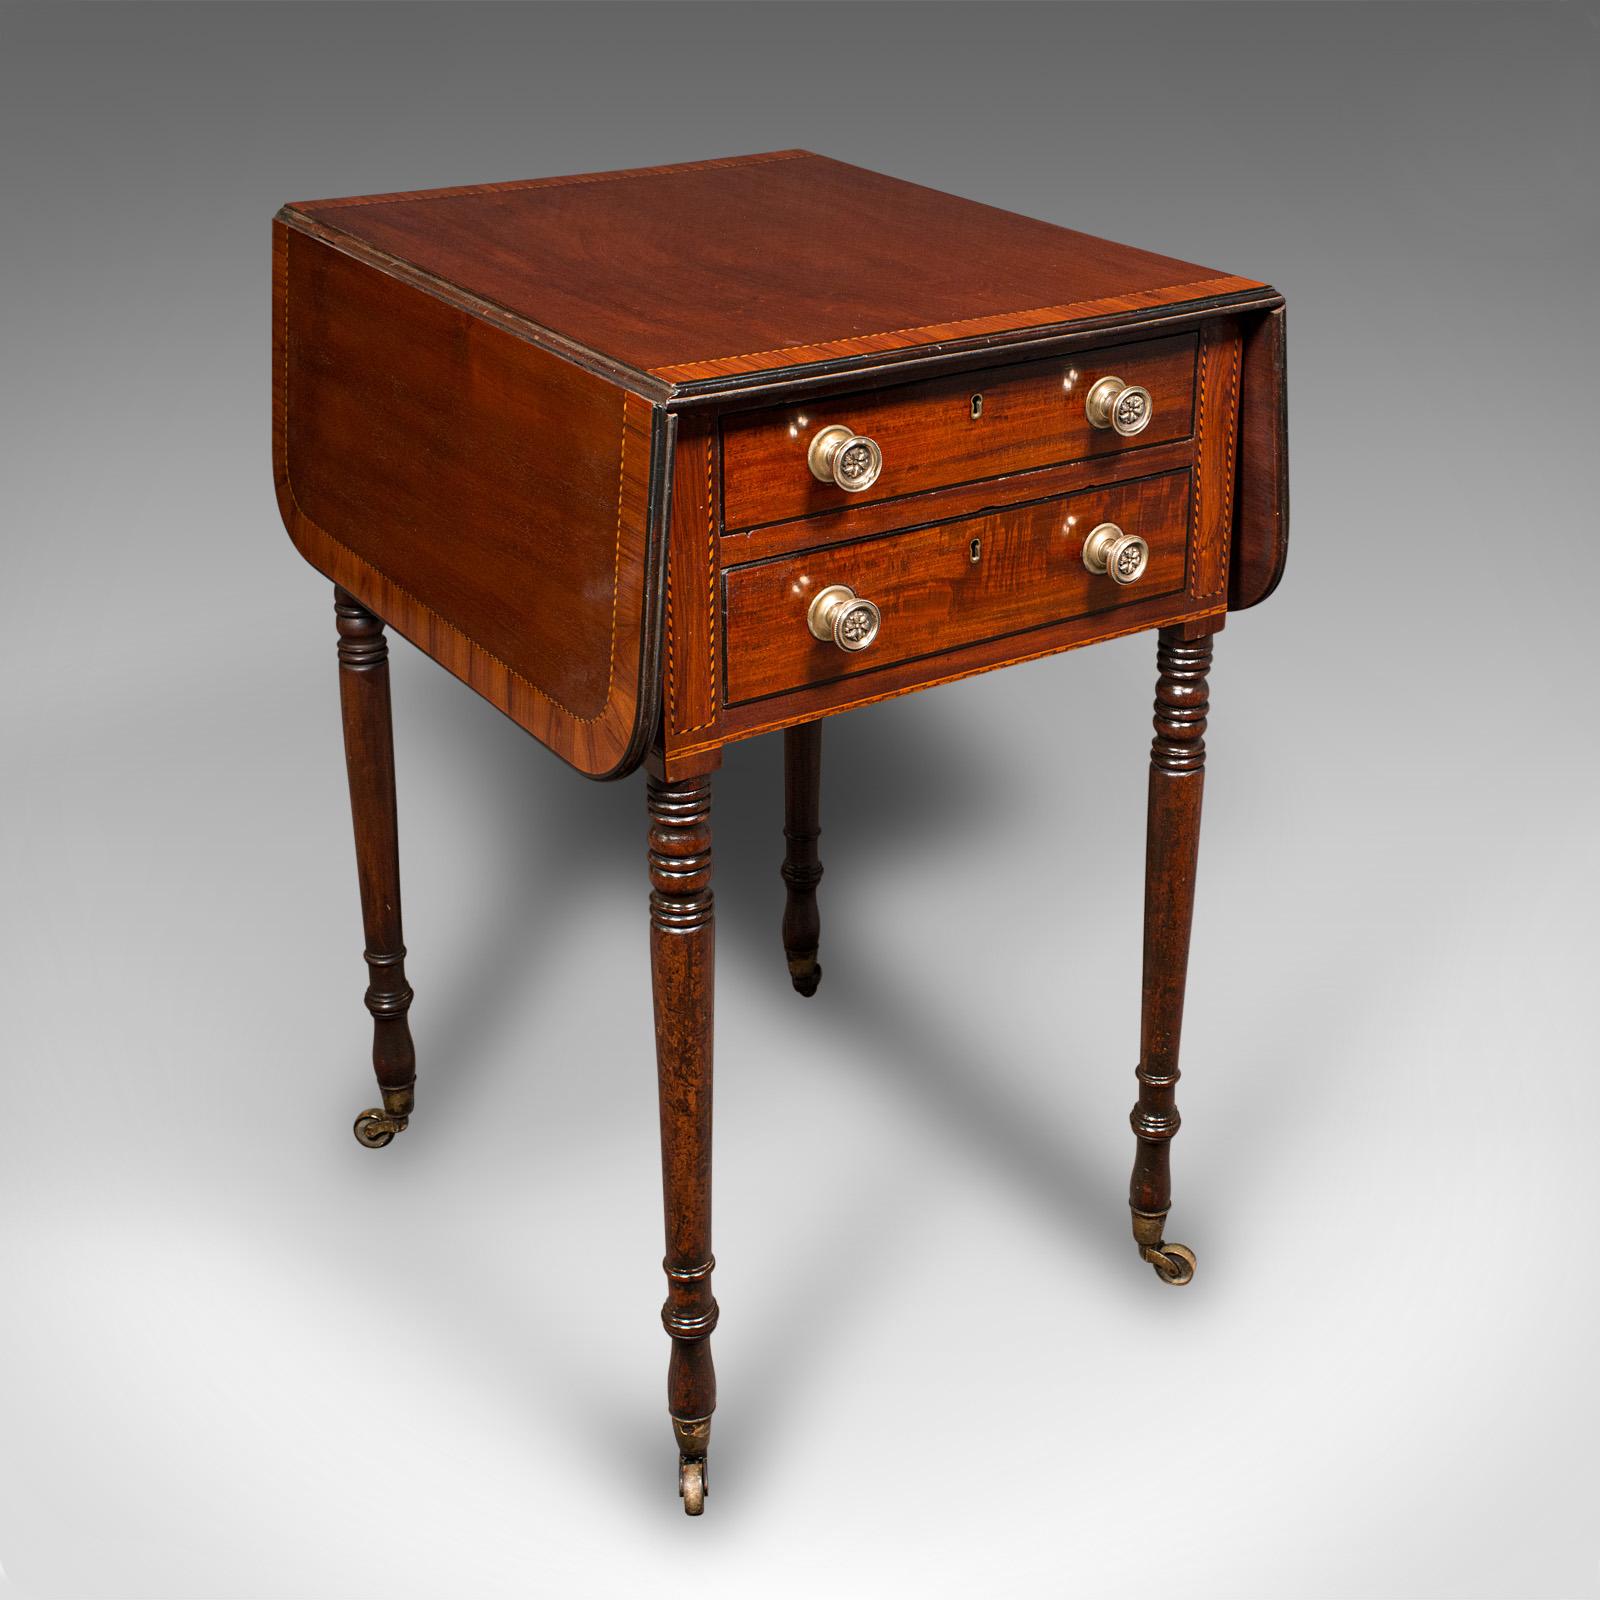 This is an antique drawing room Pembroke table. An English, mahogany drop leaf side or lamp table, dating to the Regency period, circa 1820.

Beautifully presented small table, with great colour and craftsmanship
Displays a desirable aged patina